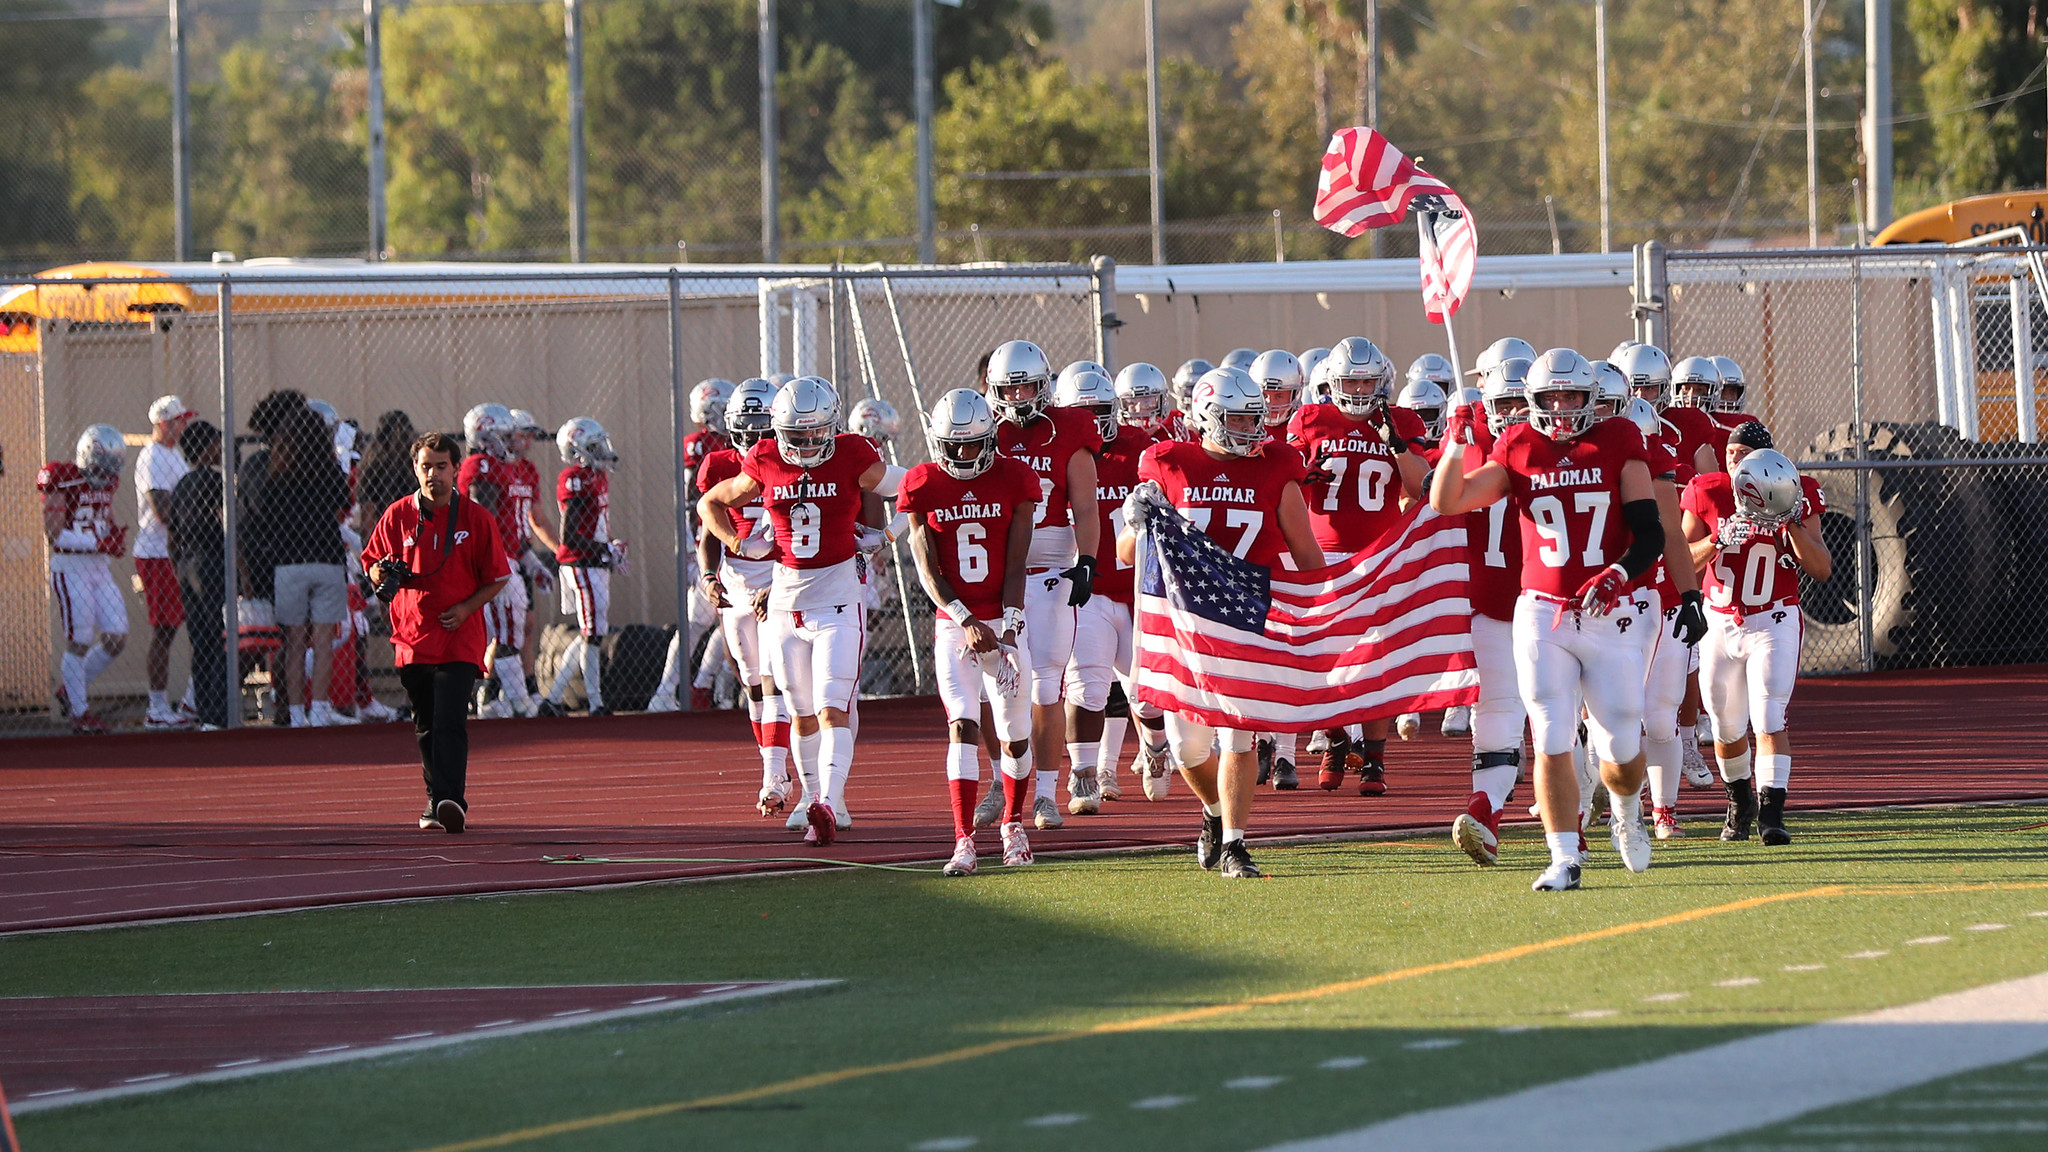 A group of Palomar football players run on a field. Two of the players in the front carries an American flag.